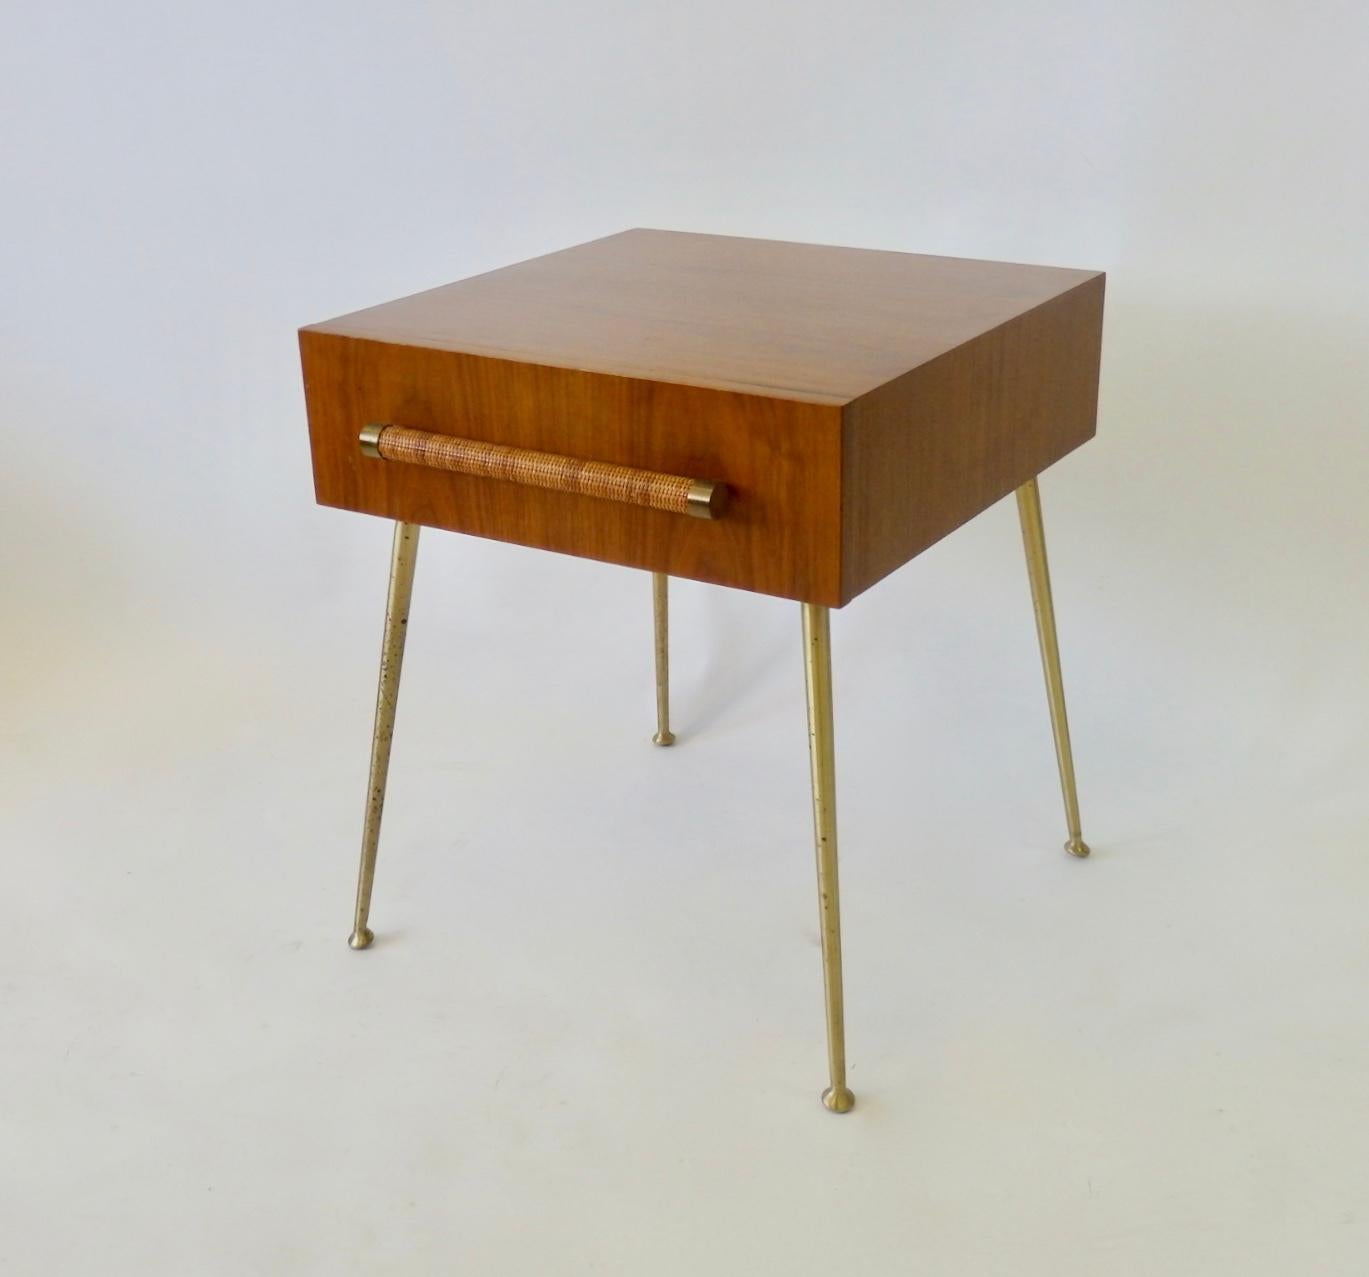 Nice original finish T.H. Robsjohn Gibbings for Widdicomb nightstand or side table. Raffia or cane covered drawer pull on brass tone legs. Tagged with Robsjohn Gibbings Widdicomb label. Date stamped 8/1956. I can offer reduced shipping with legs